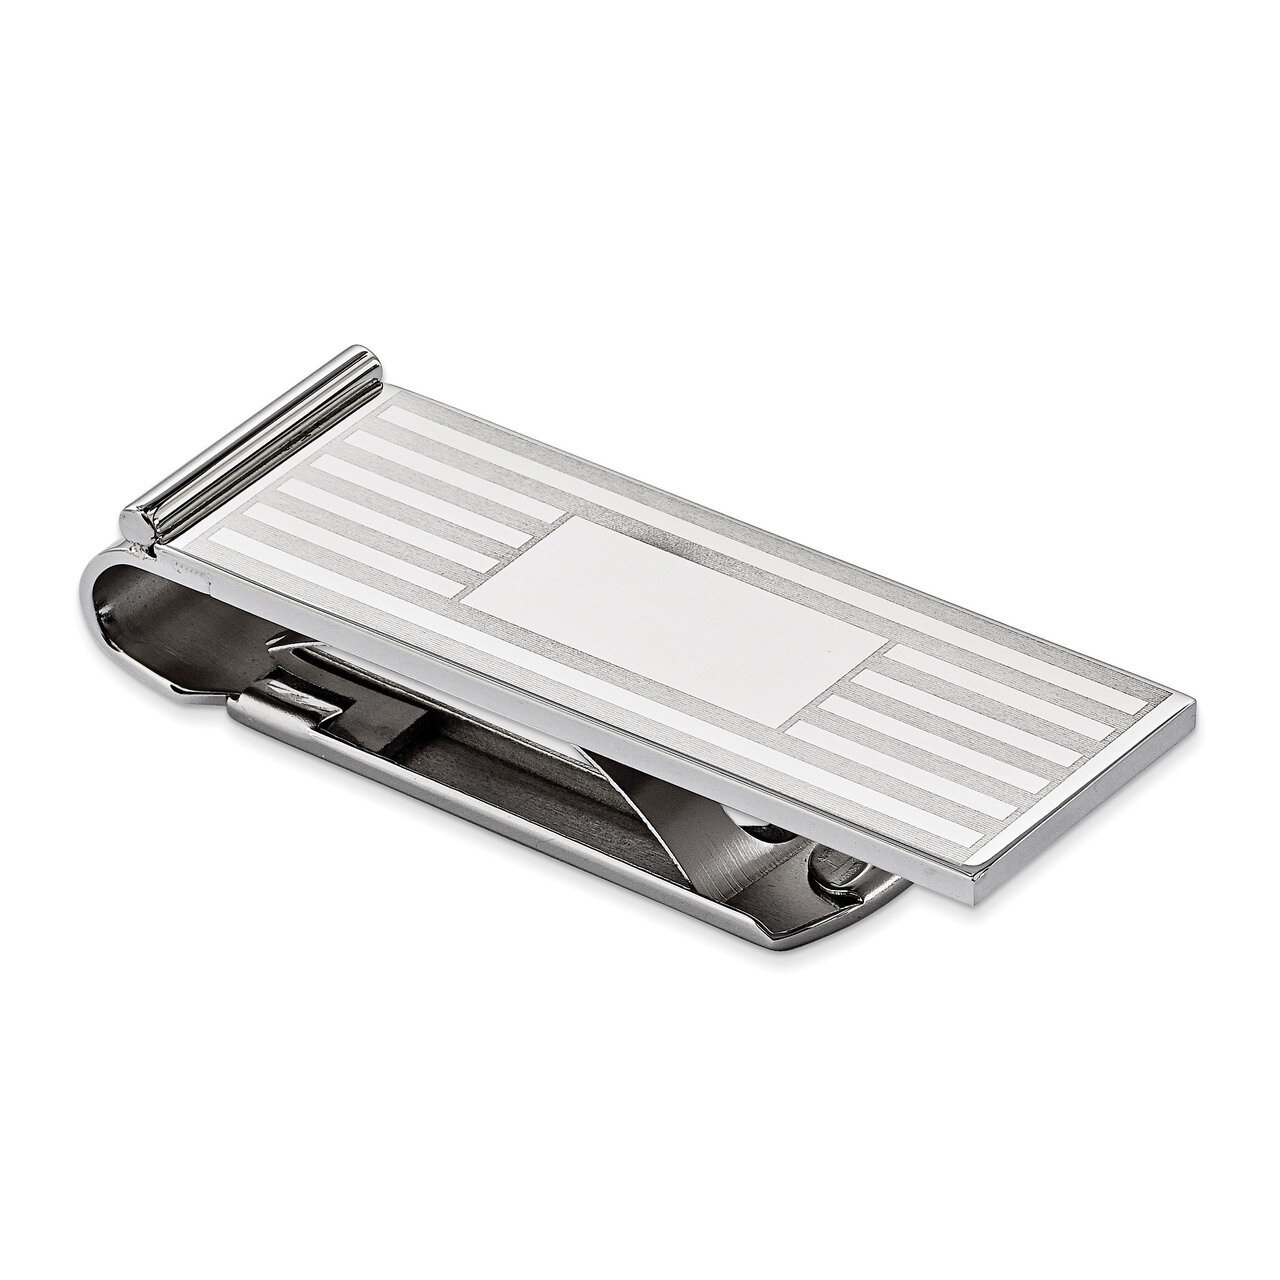 Brushed and Polished Money Clip - Stainless Steel SRM128